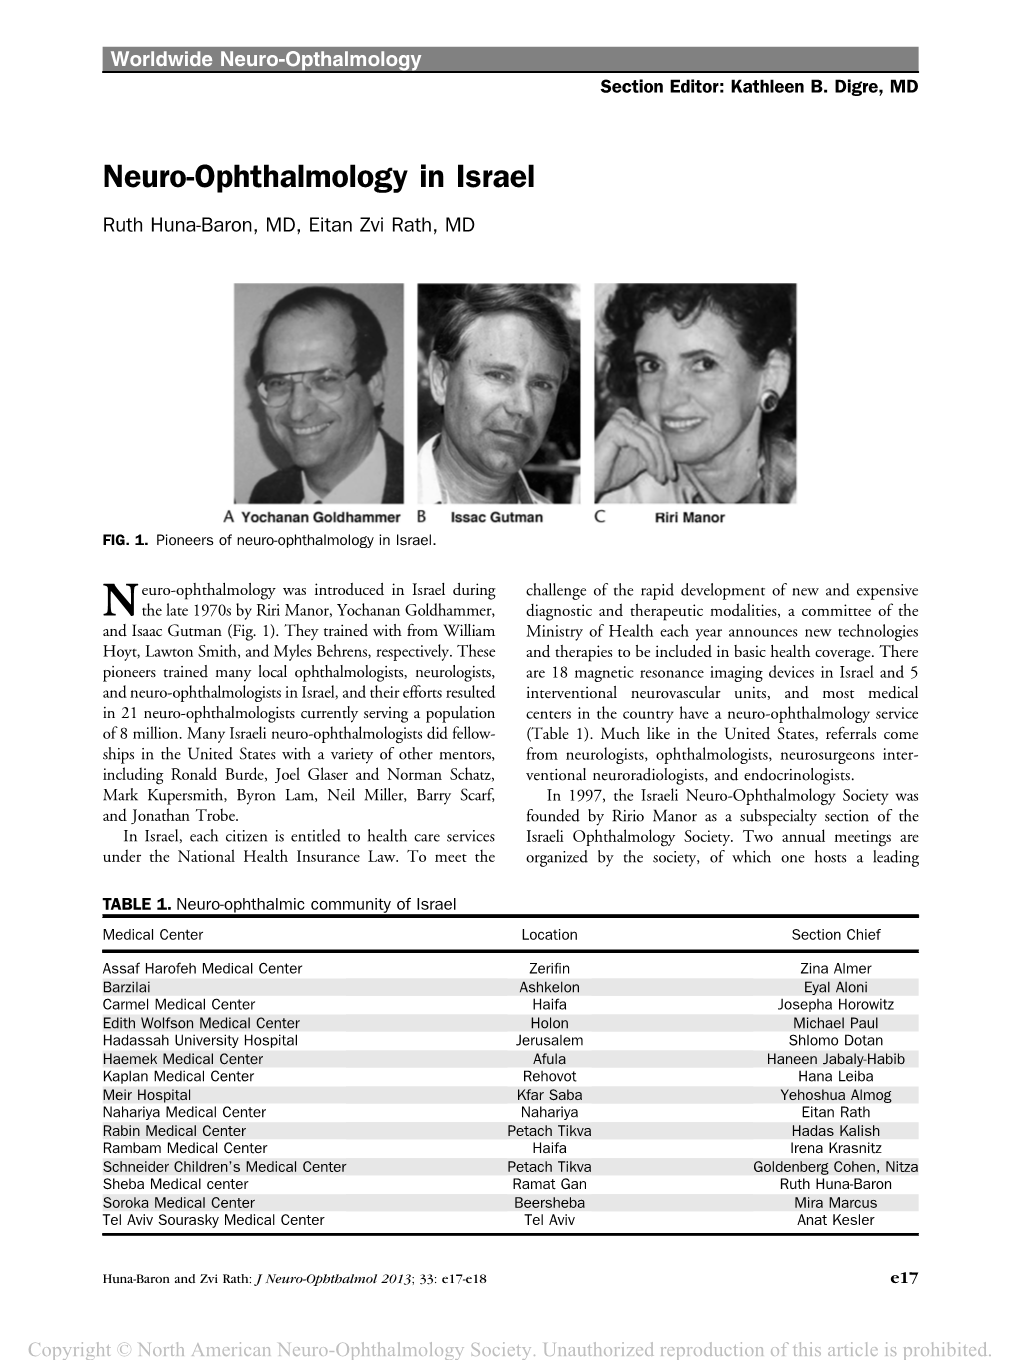 Neuro-Ophthalmology in Israel